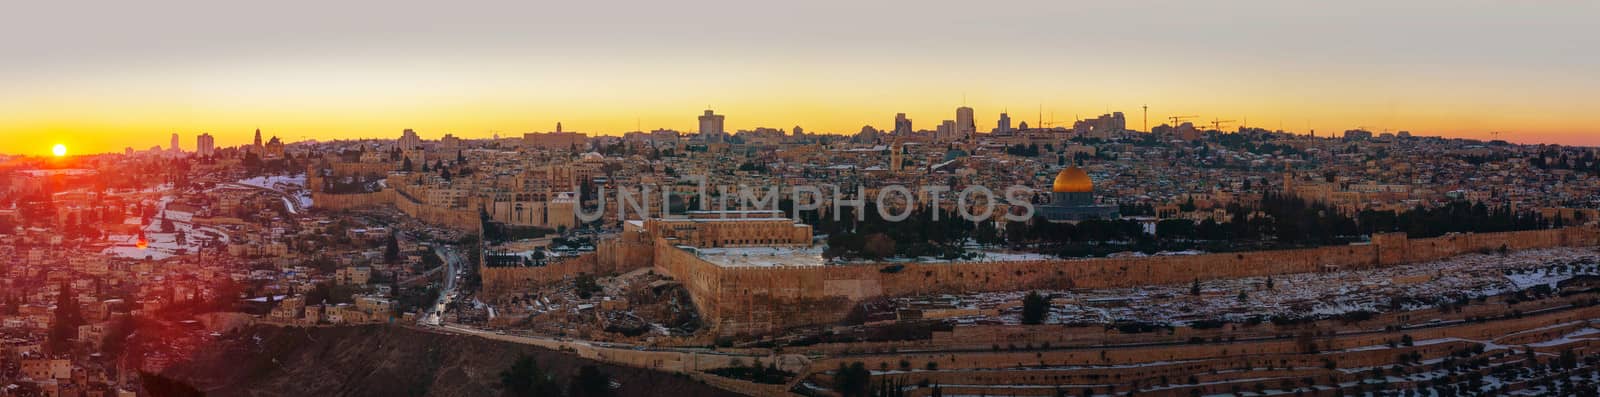 Overview of Old City in Jerusalem, Israel with The Golden Dome Mosque